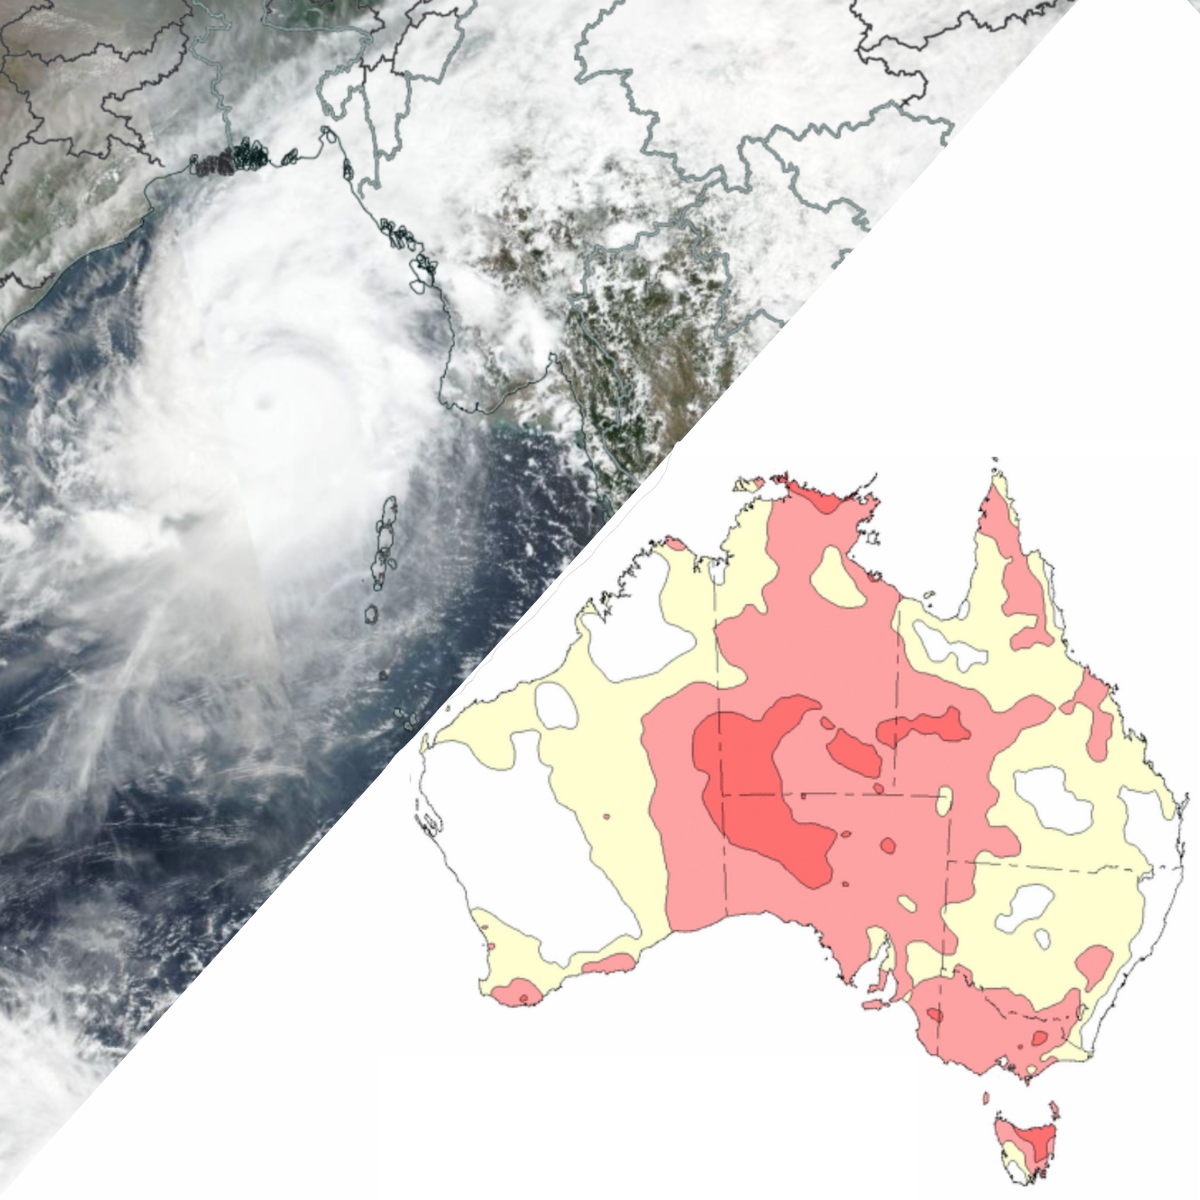 Cyclone Mocha could lead to a hot dry spring in Australia